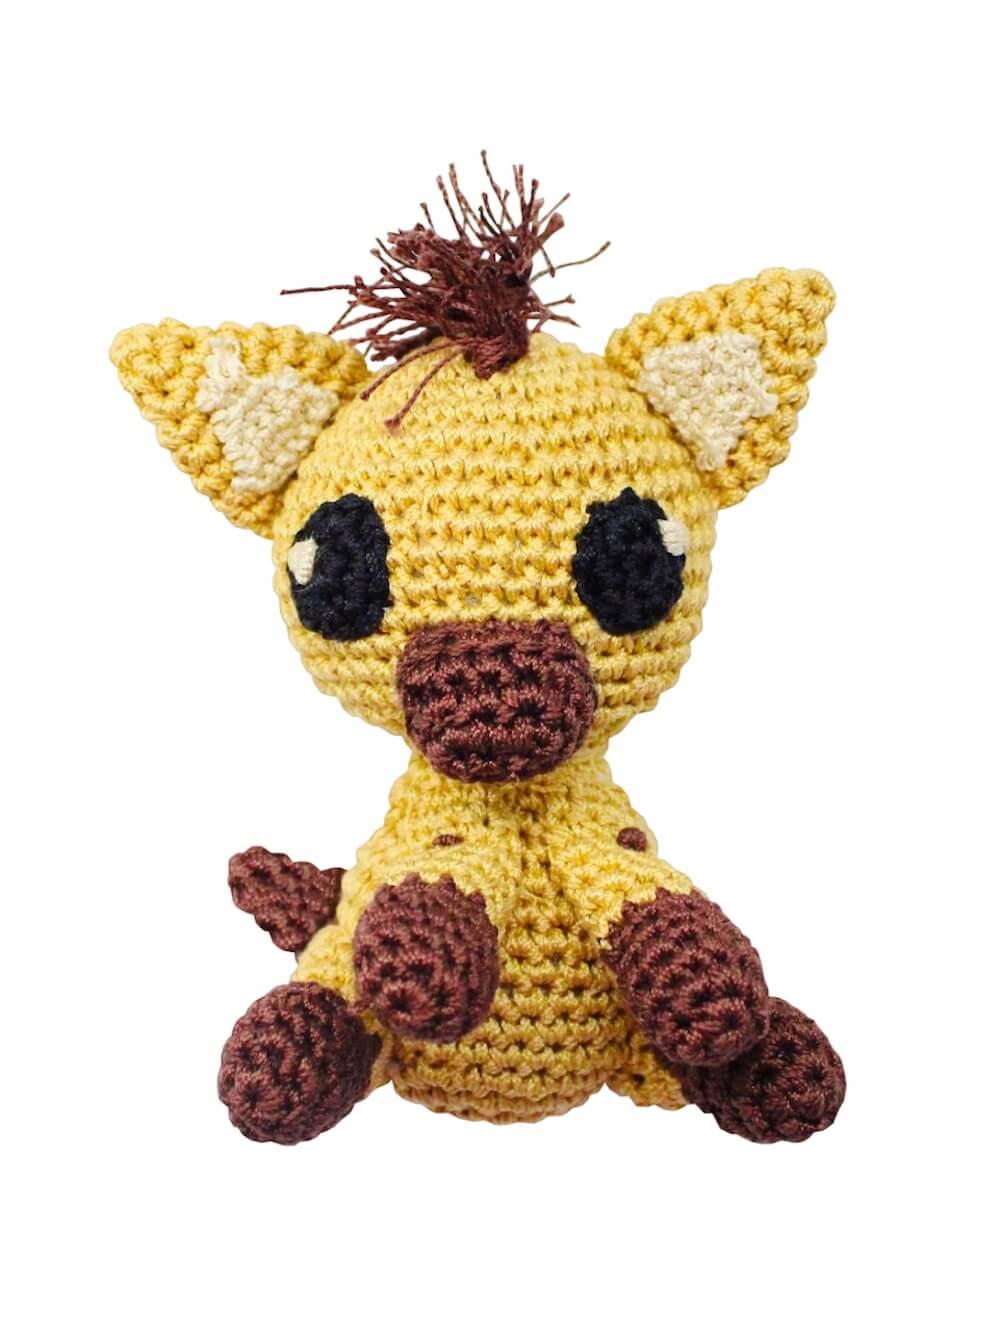 Knit Knacks "Howie the Hyena" handmade organic cotton dog toy. Mustard yellow hyena with brown trim and fringed hair.